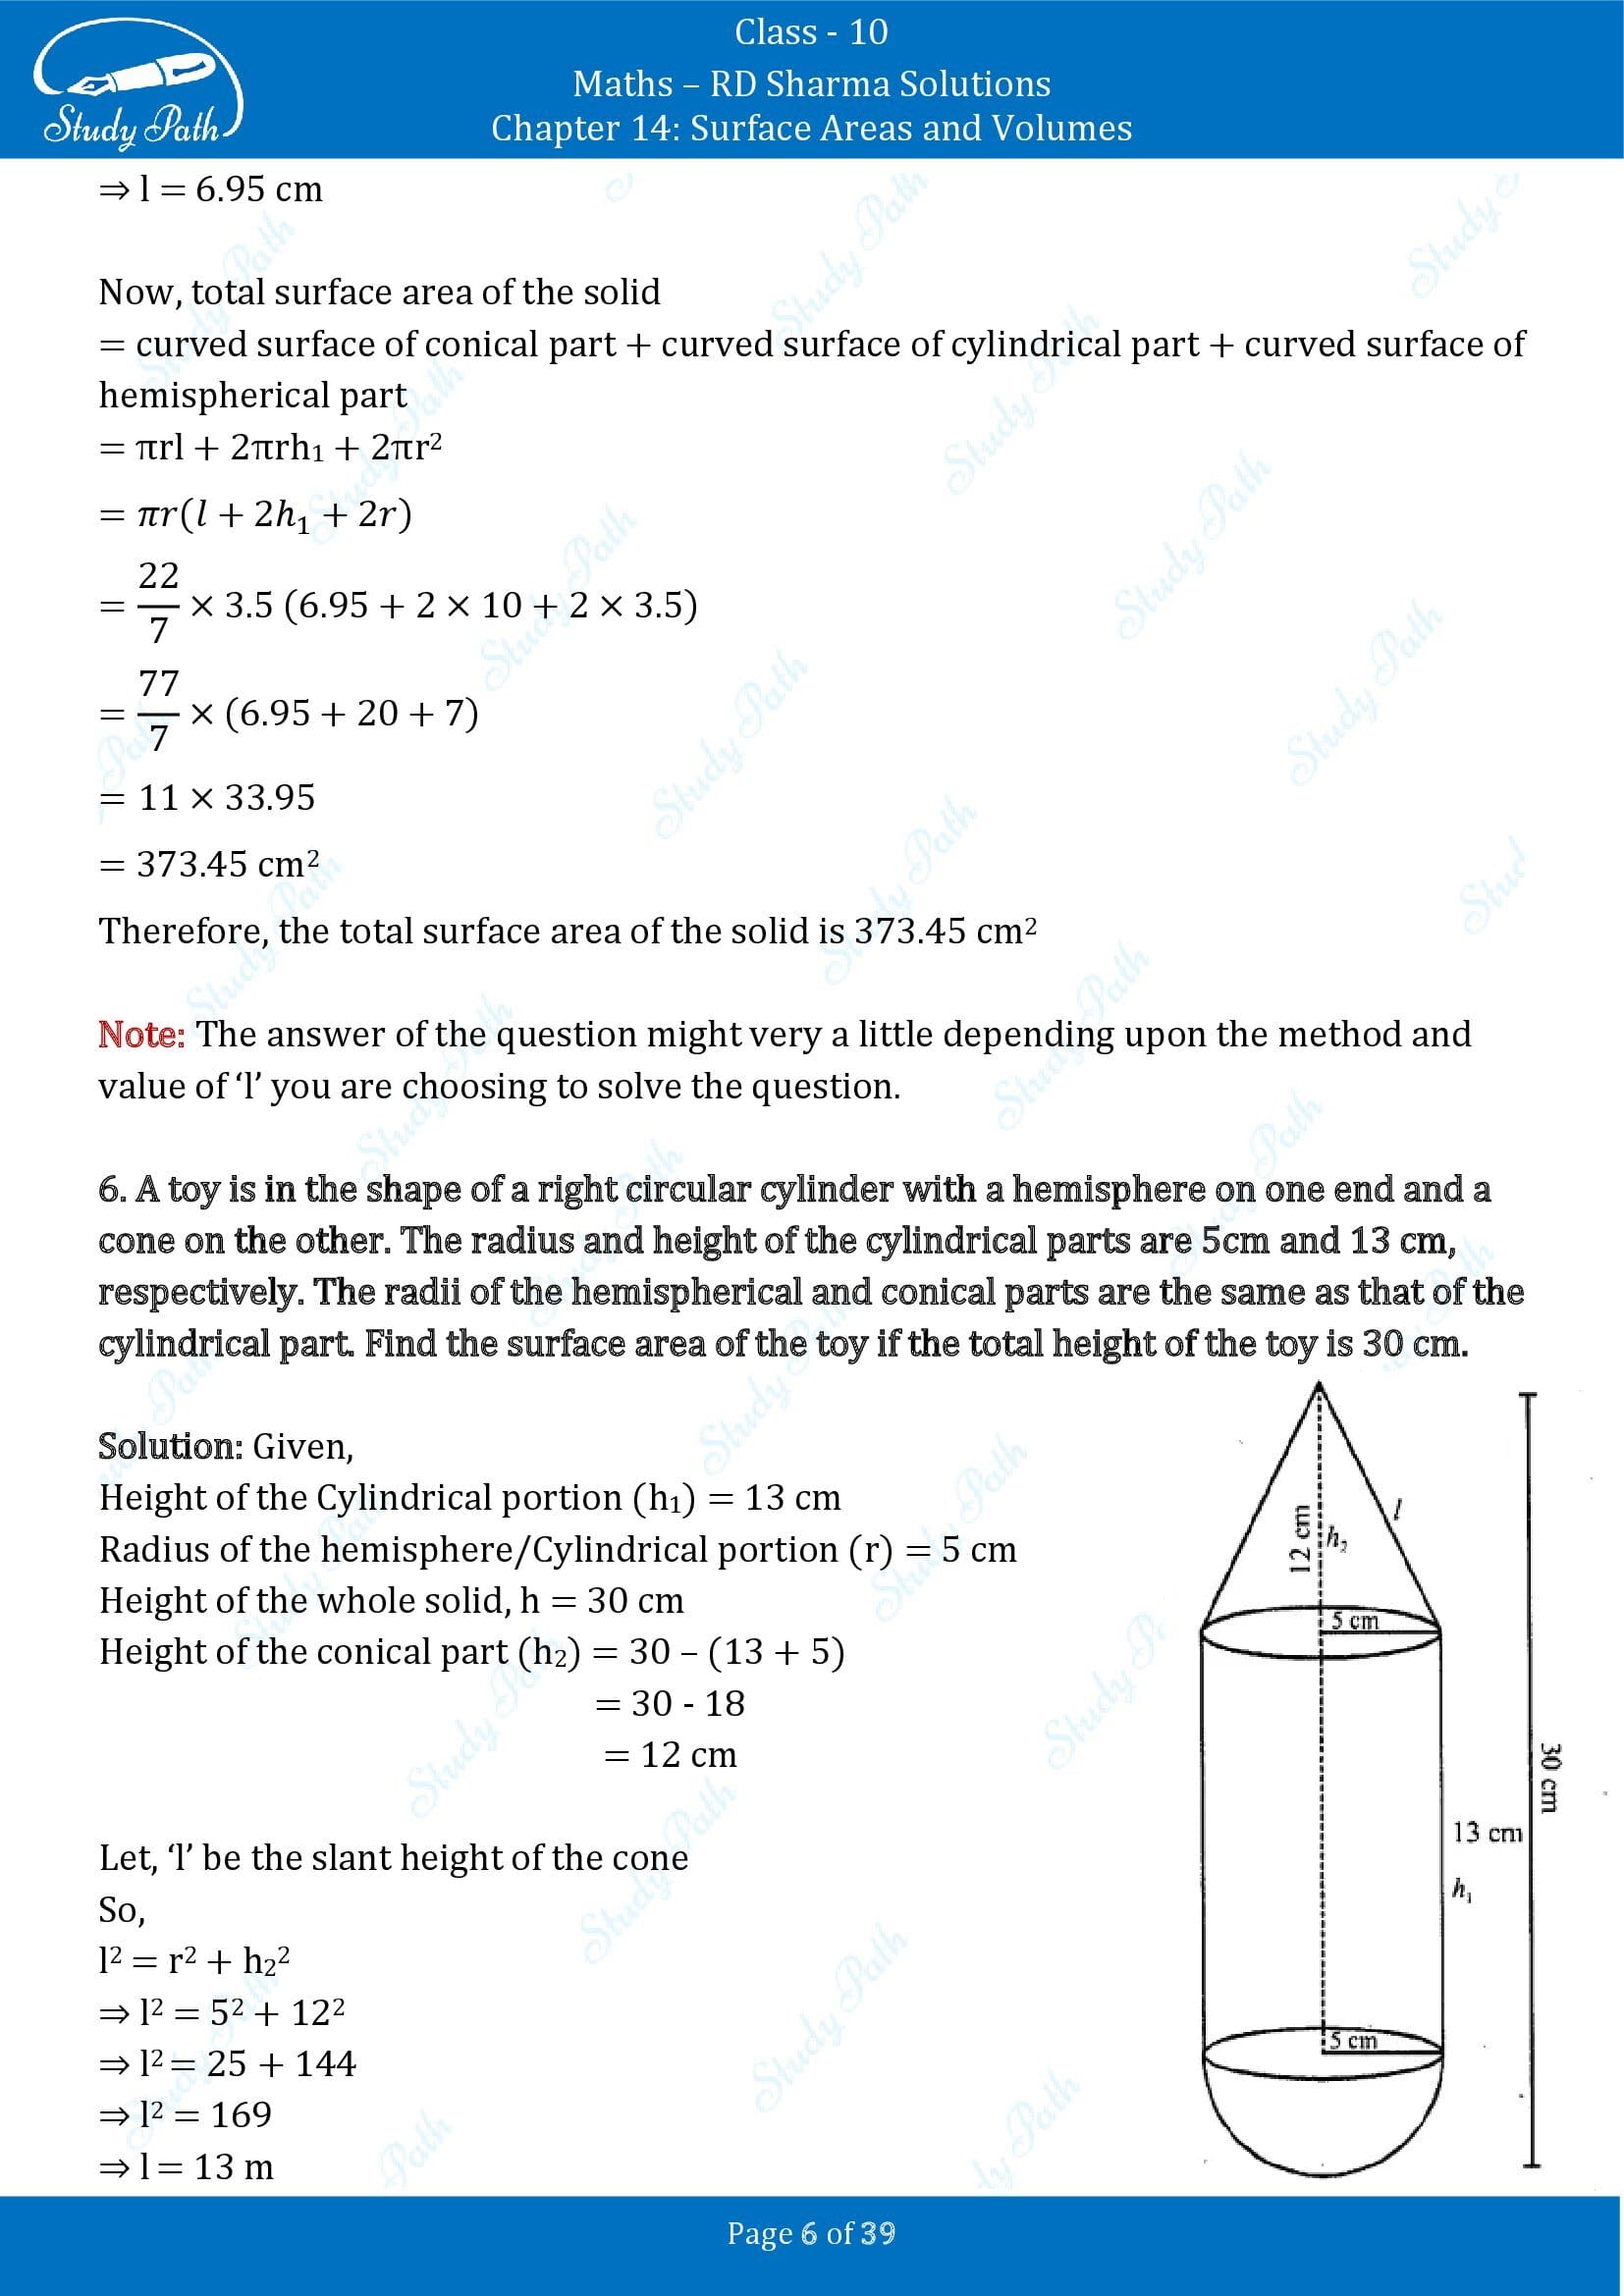 RD Sharma Solutions Class 10 Chapter 14 Surface Areas and Volumes Exercise 14.2 00006